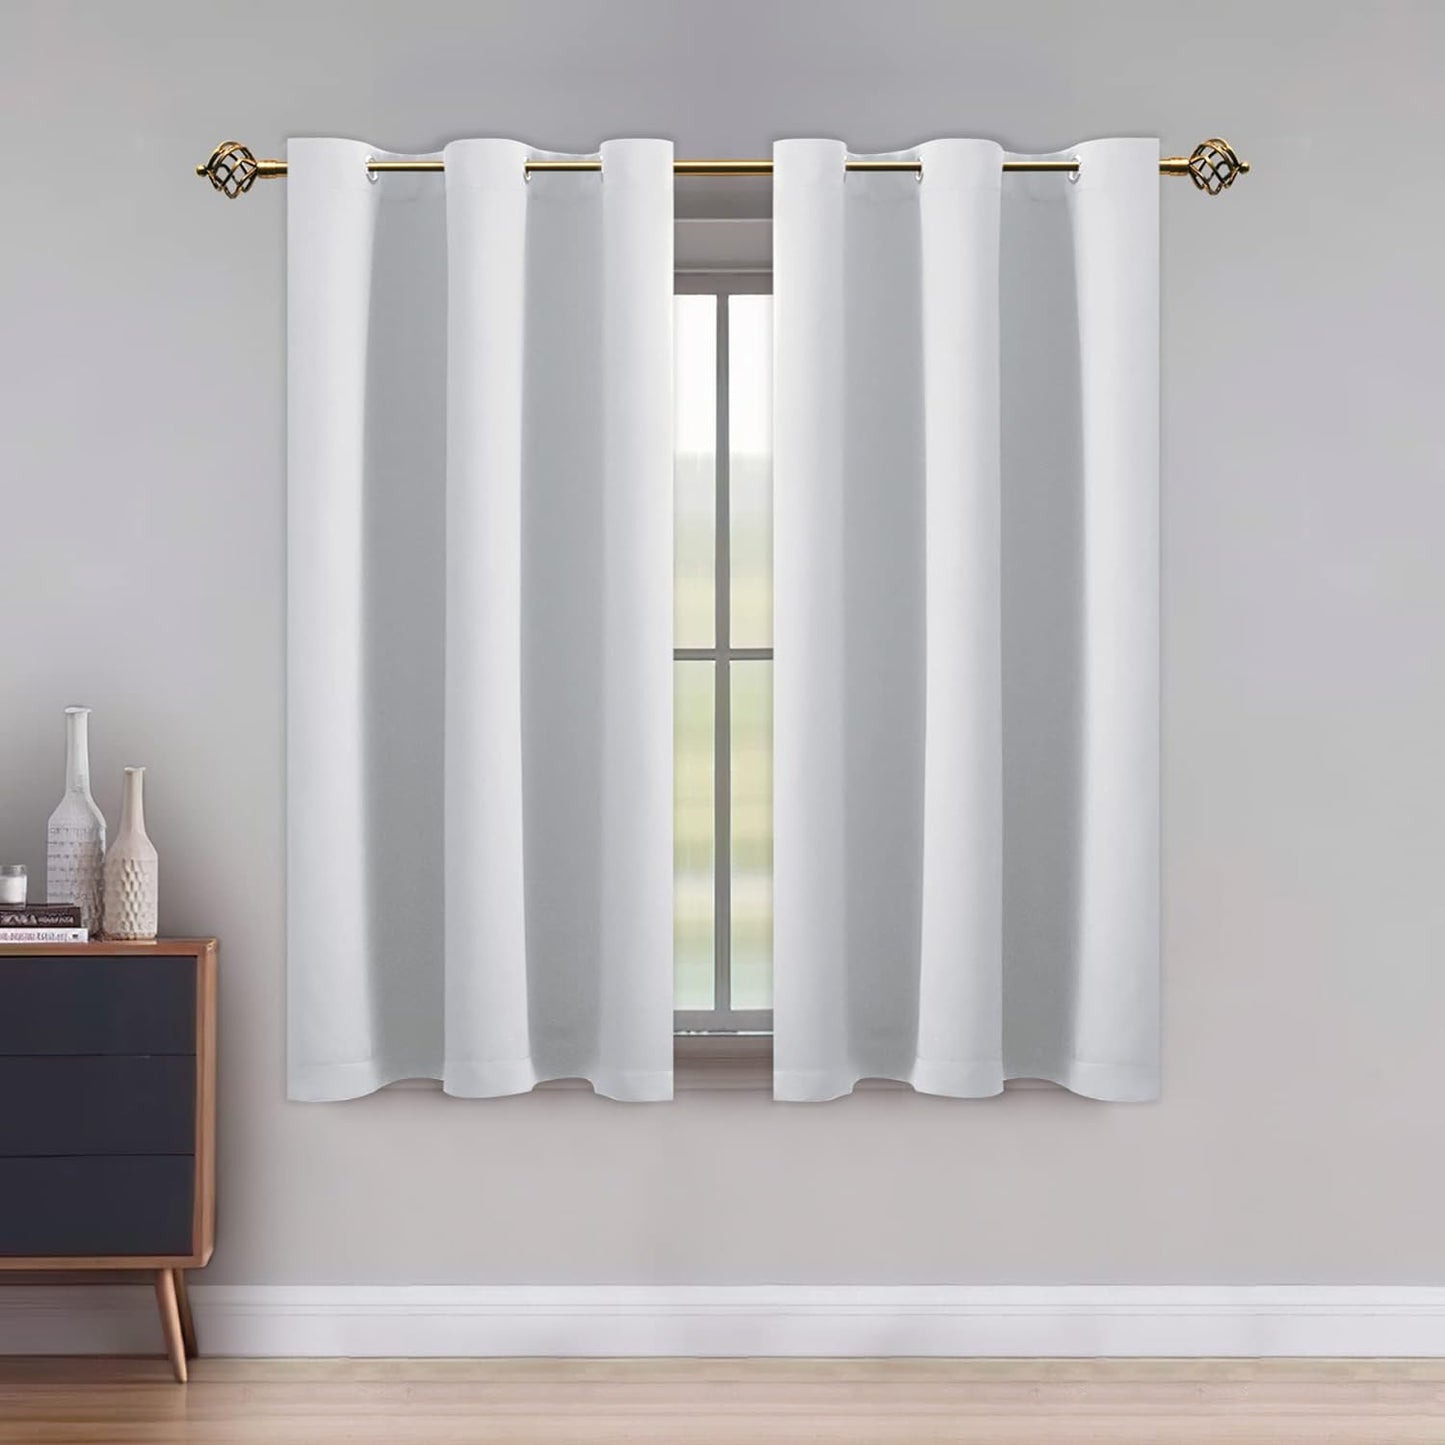 LUSHLEAF Blackout Curtains for Bedroom, Solid Thermal Insulated with Grommet Noise Reduction Window Drapes, Room Darkening Curtains for Living Room, 2 Panels, 52 X 63 Inch Grey  SHEEROOM Greyish White 42 X 45 Inch 